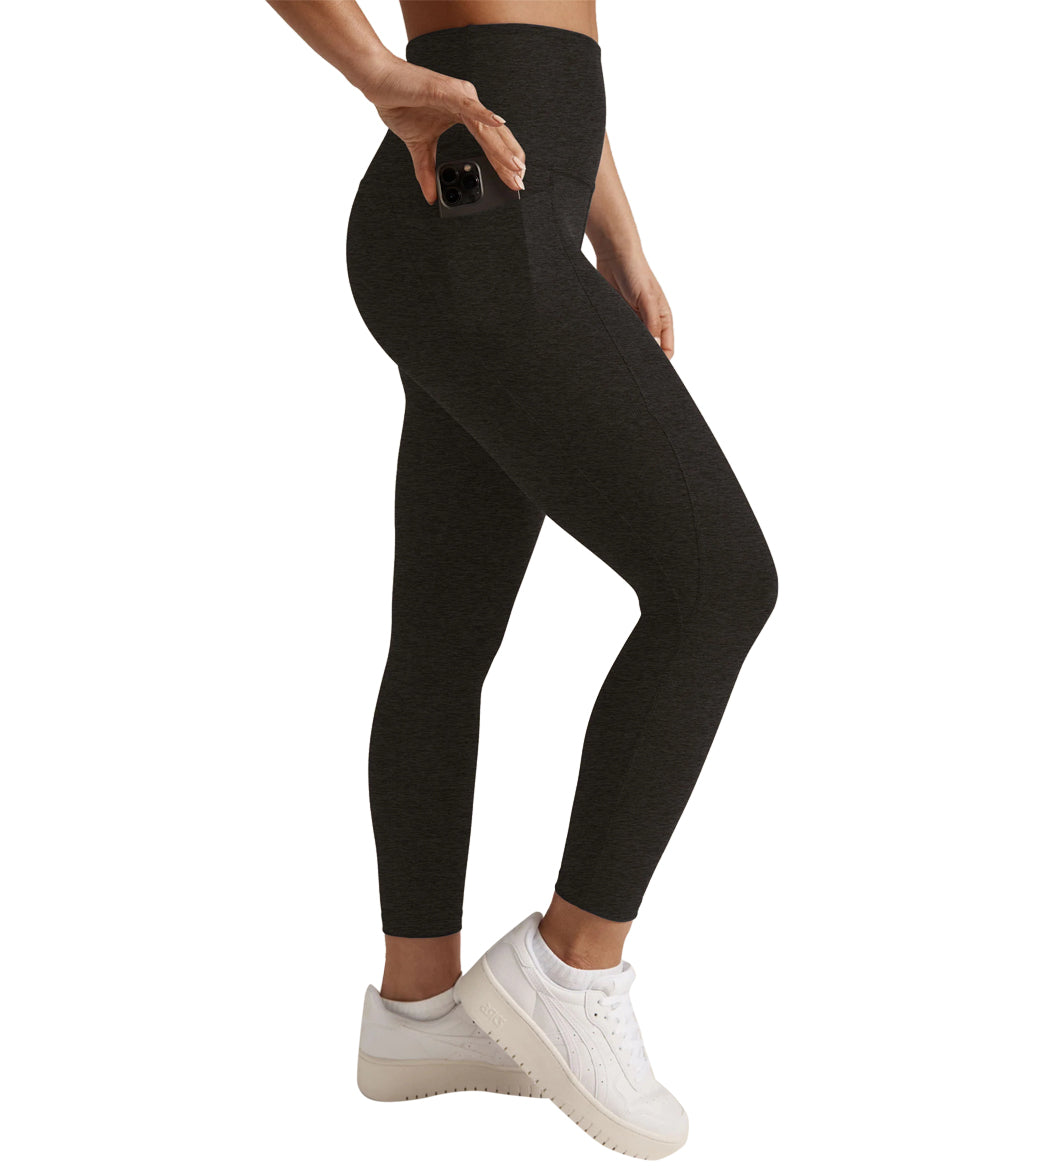 https://www.alloyapparesl.shop/wp-content/uploads/1706/56/only-38-80-usd-for-beyond-yoga-spacedye-out-of-pocket-high-waisted-capri-legging-darkest-night-online-at-the-shop_1.jpg